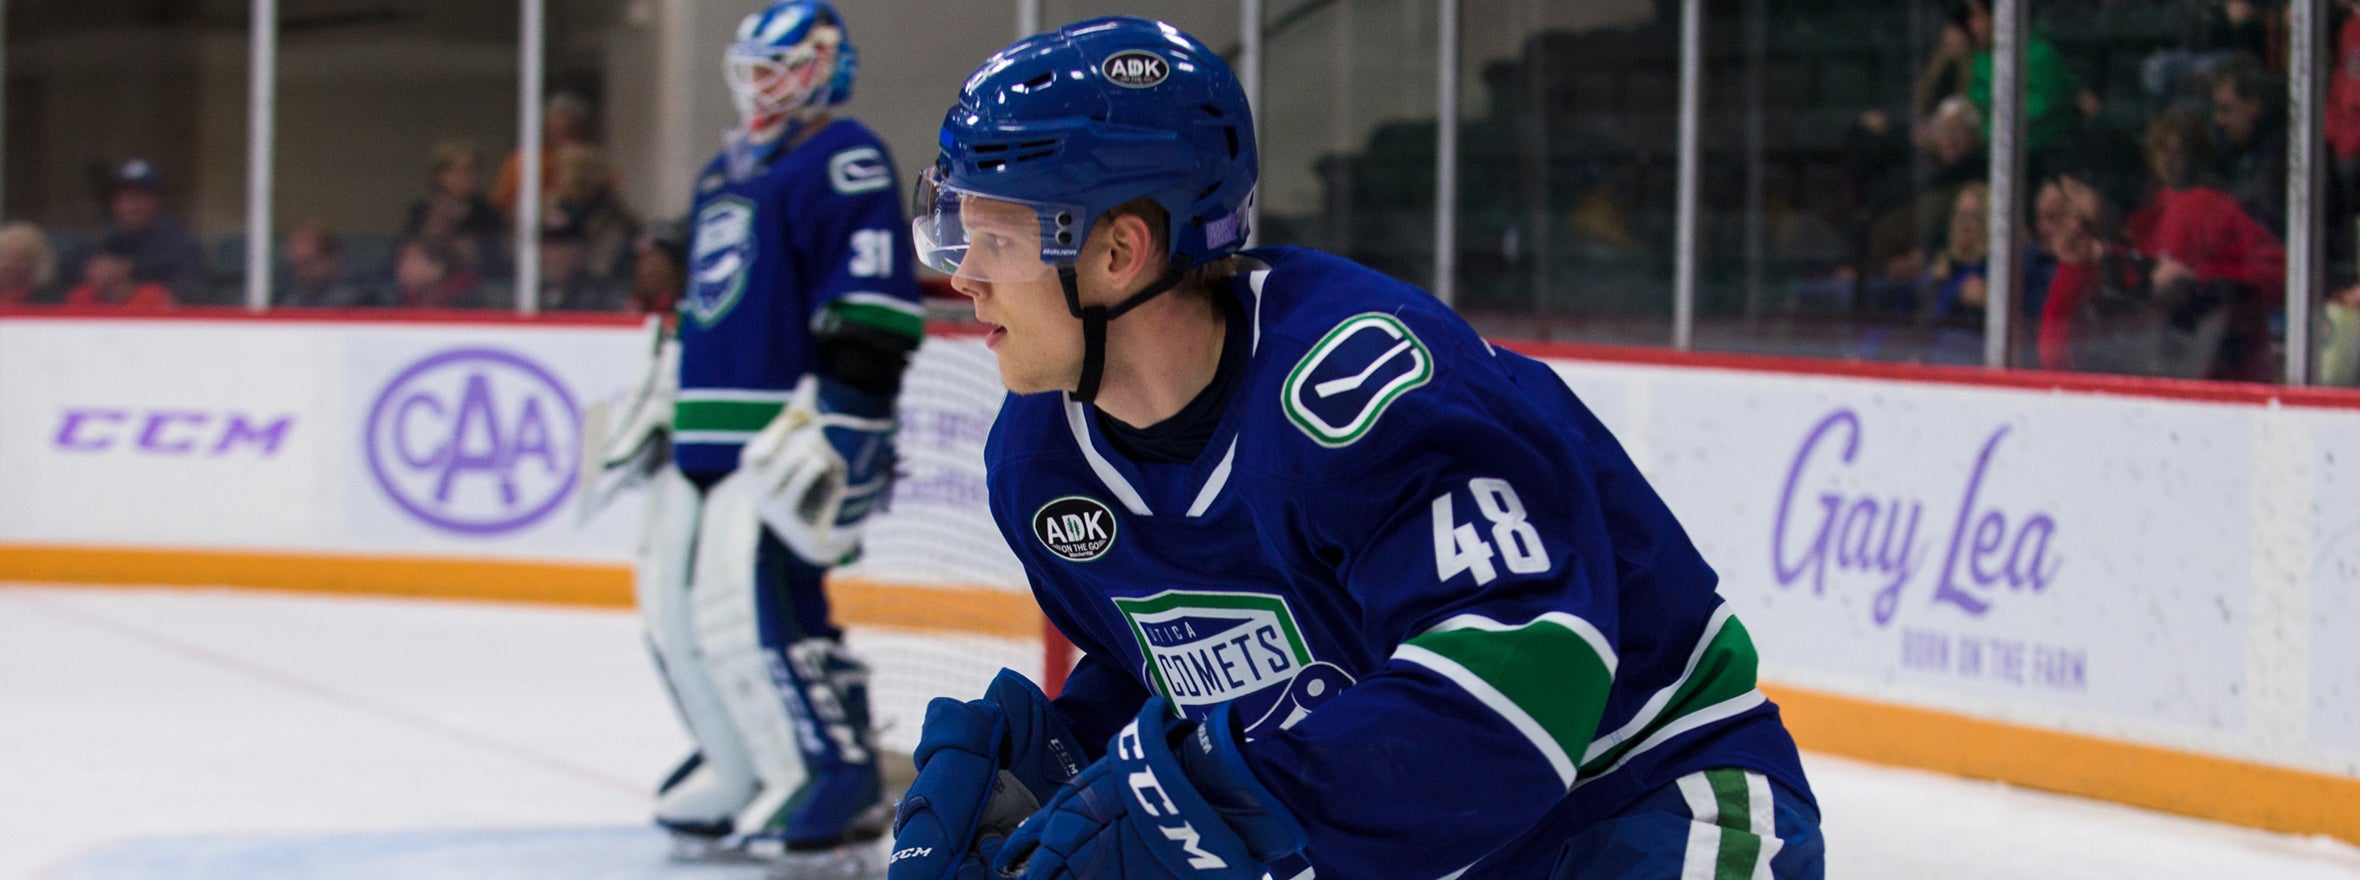 COMETS POWER STIFLED IN SHOOTOUT